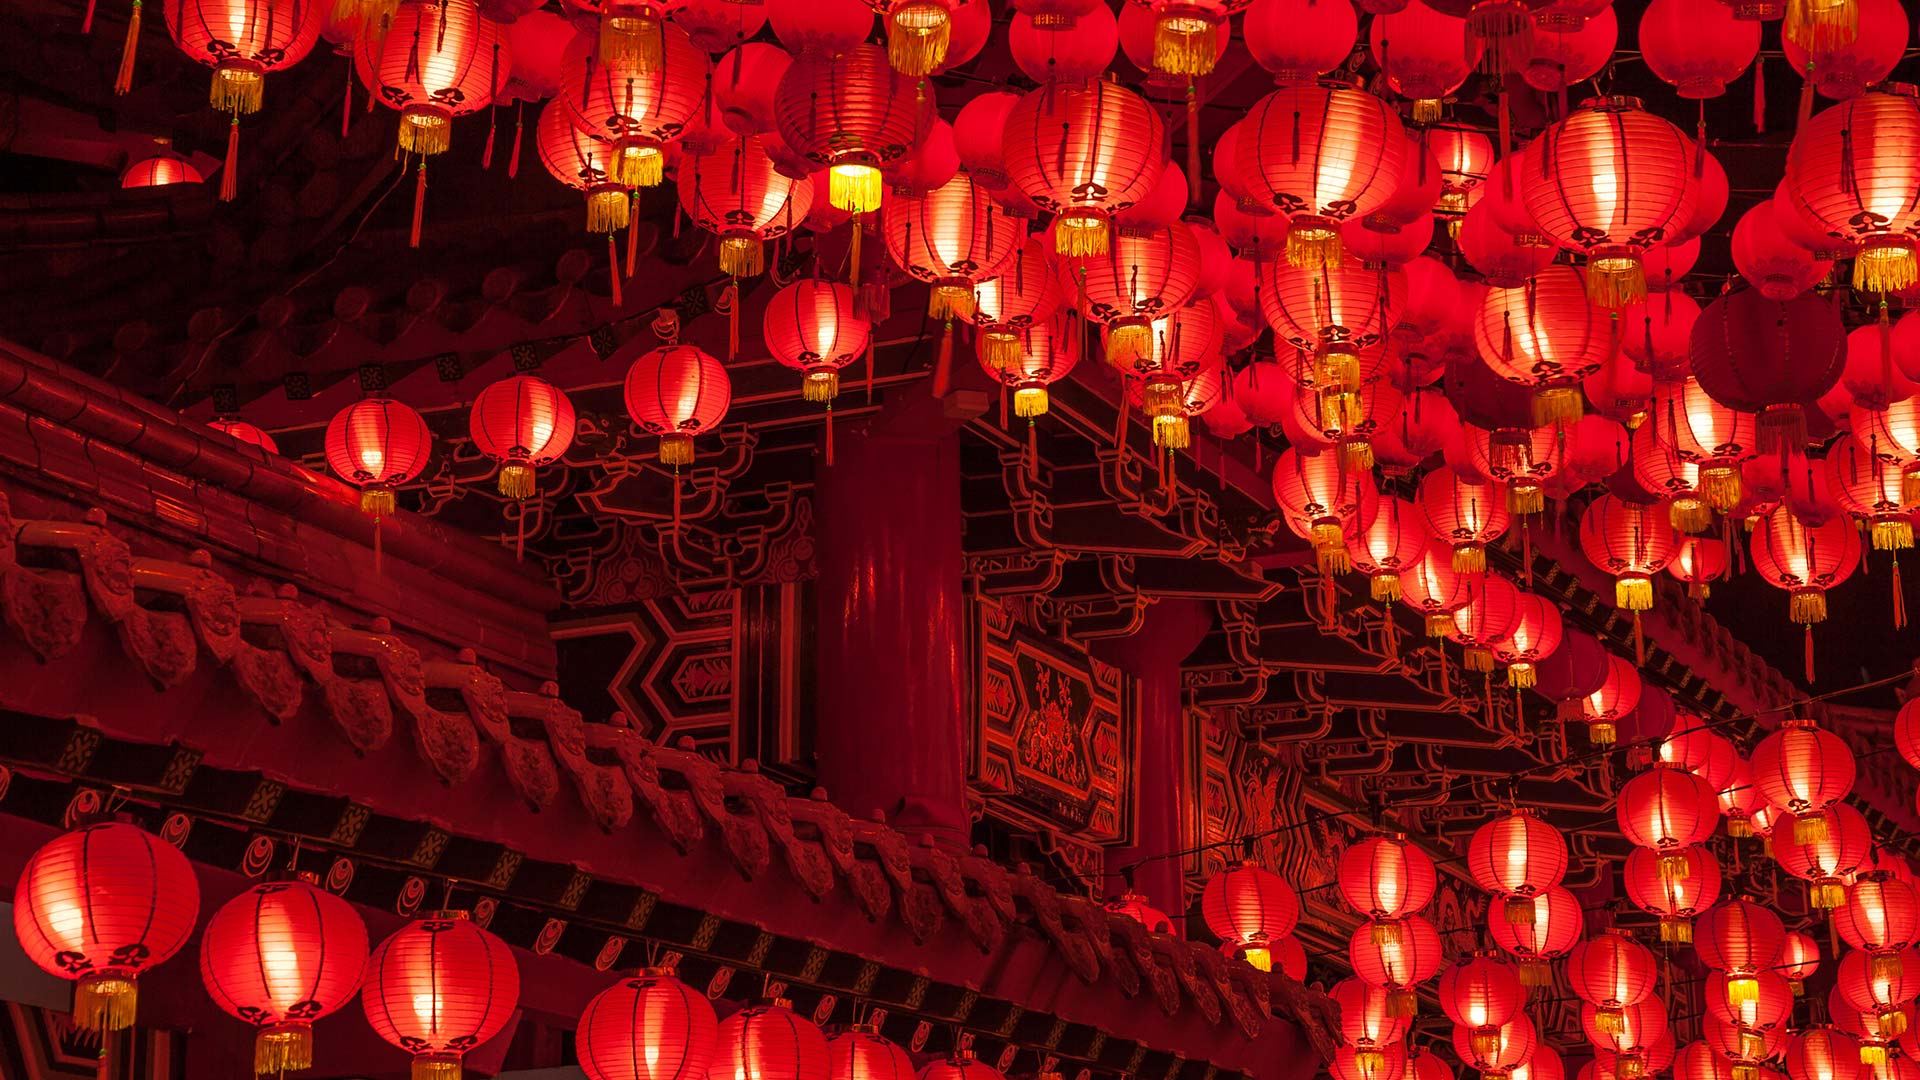 Red lanterns hanging from the ceiling of a building. - Chinese